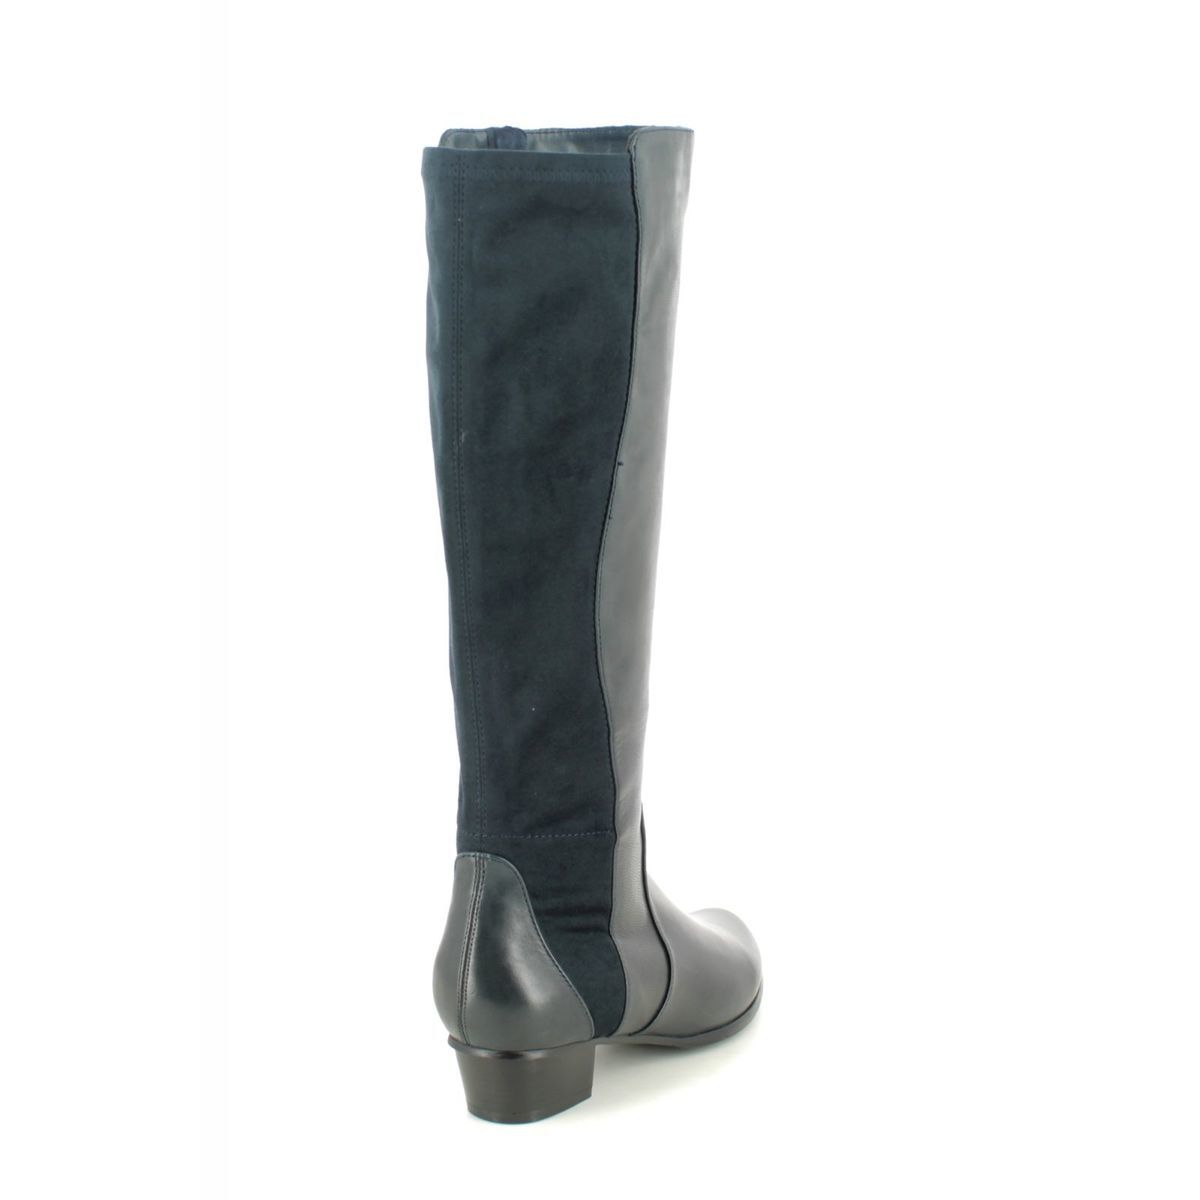 Regarde le Ciel Stefany 274 0274-5432 Navy Leather knee-high boots